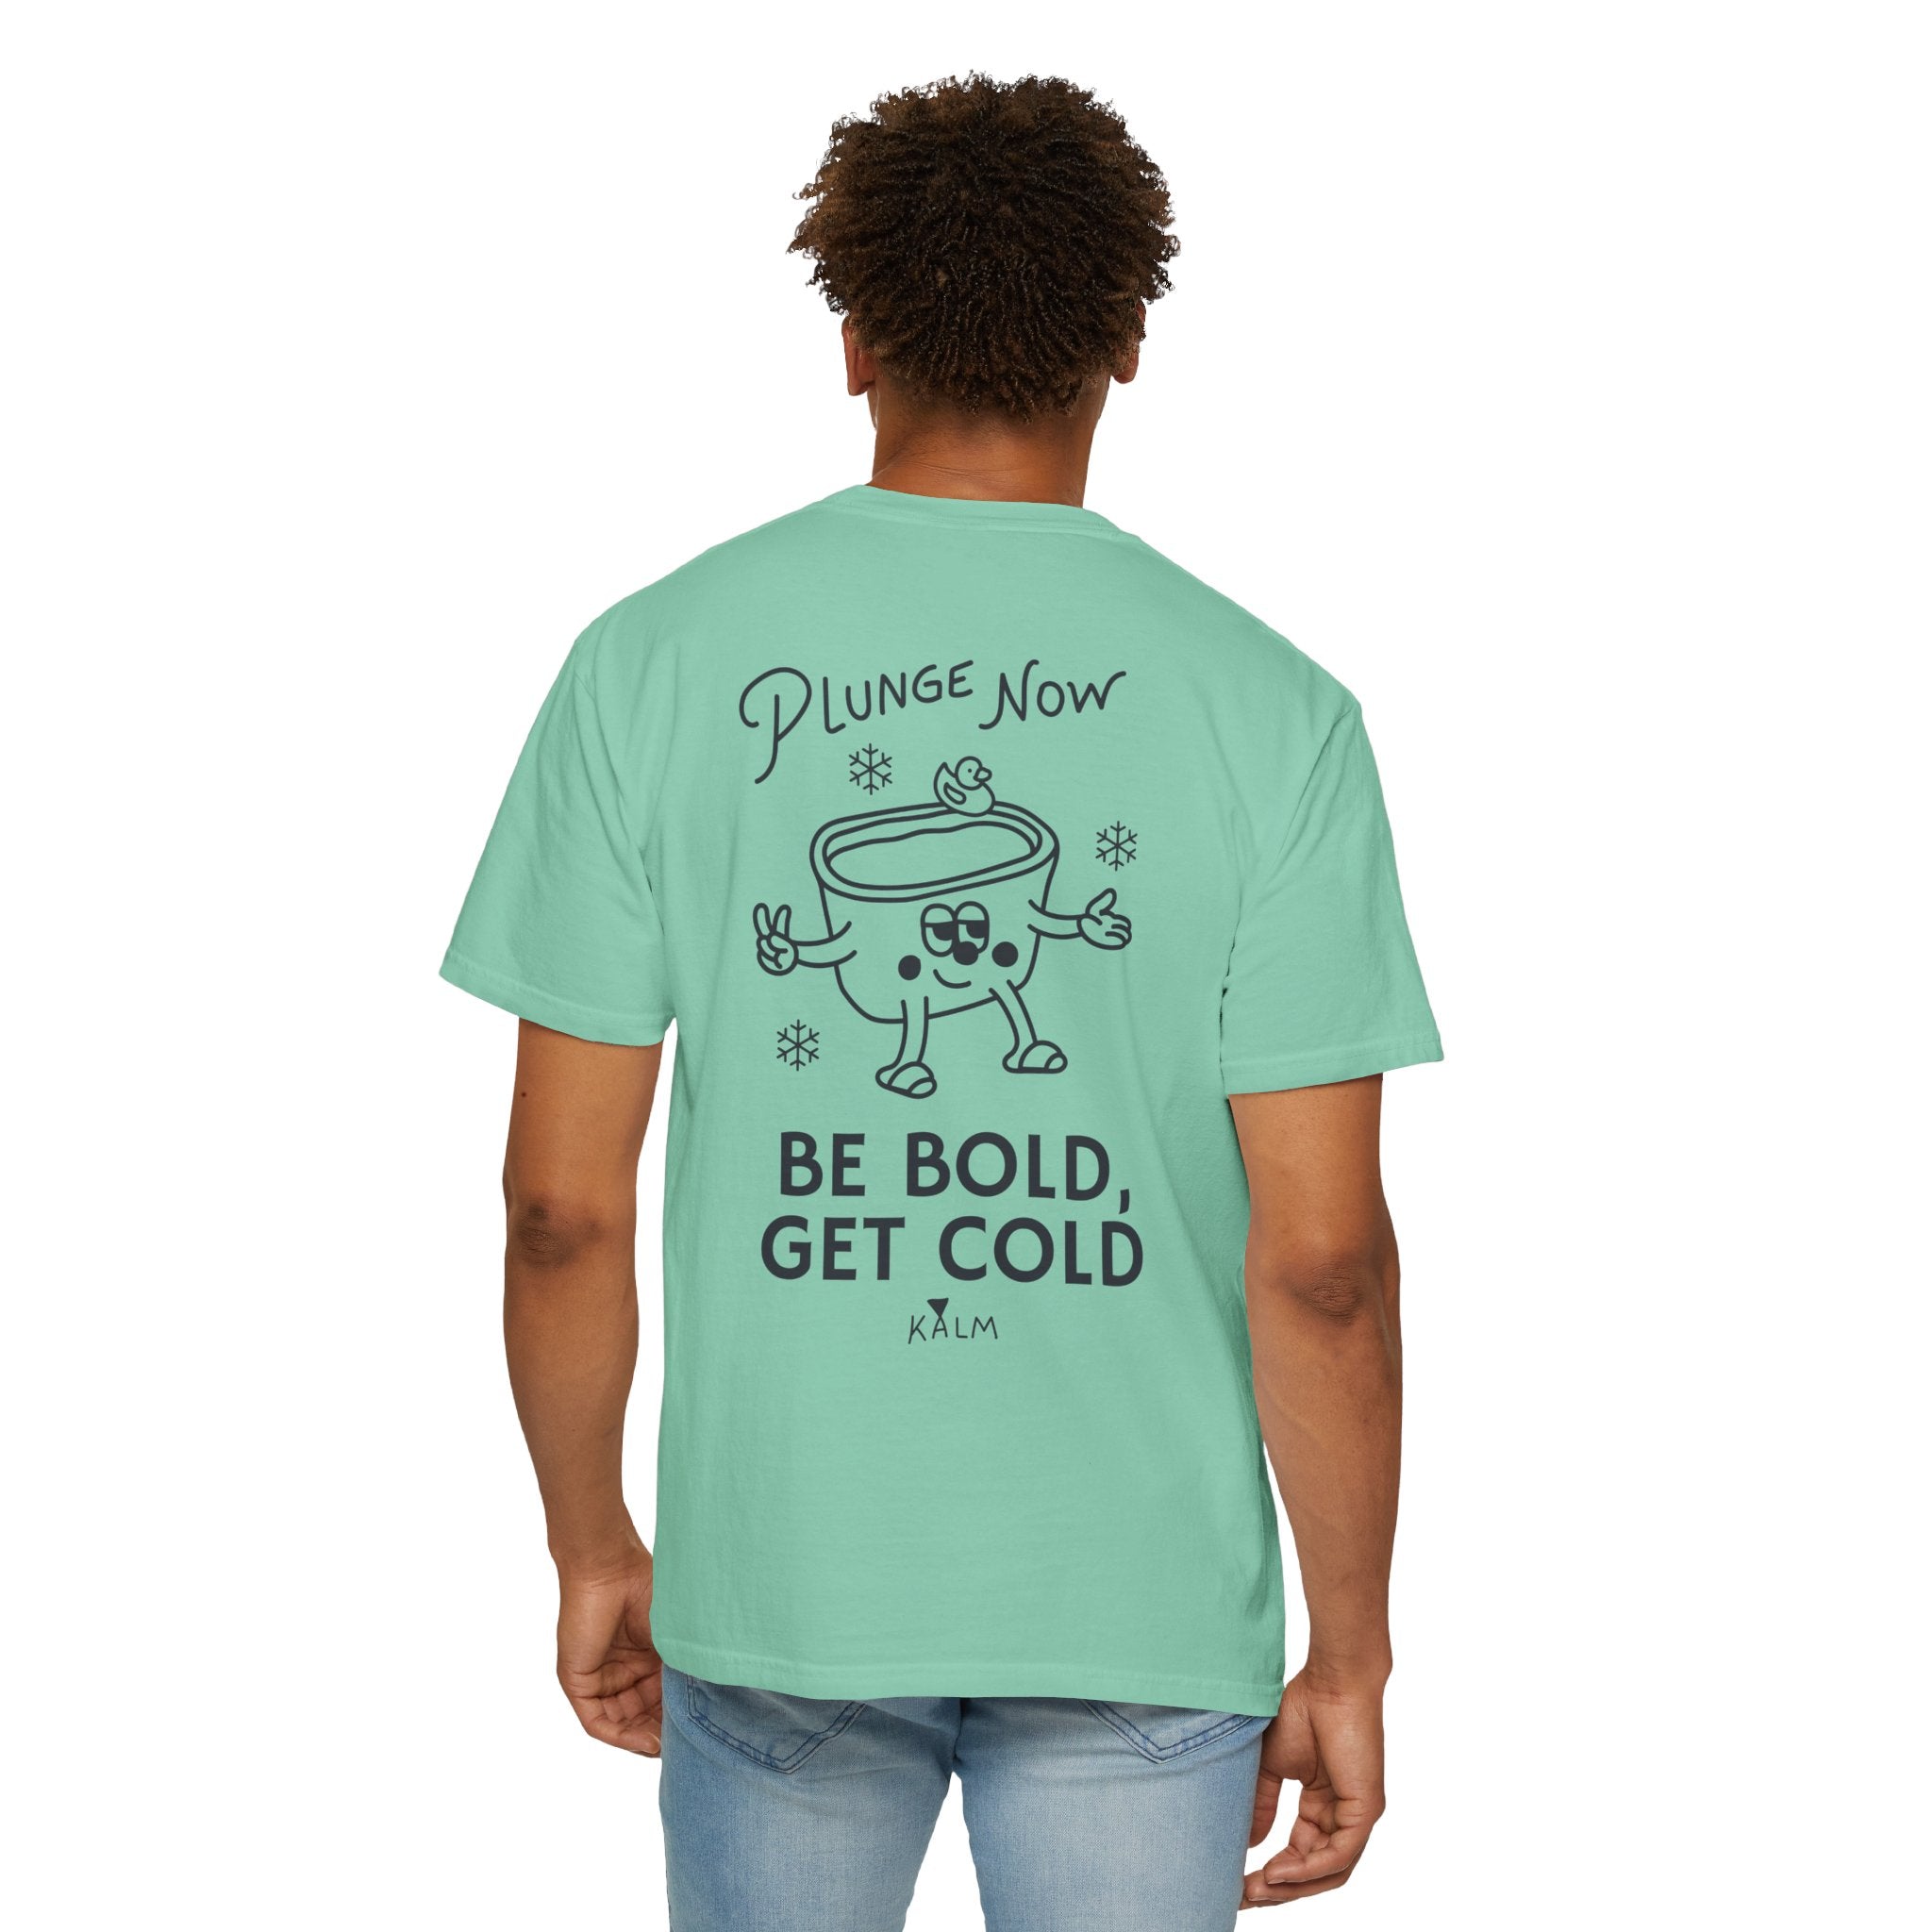 Be Bold, Get Cold Garment-Dyed T-shirt